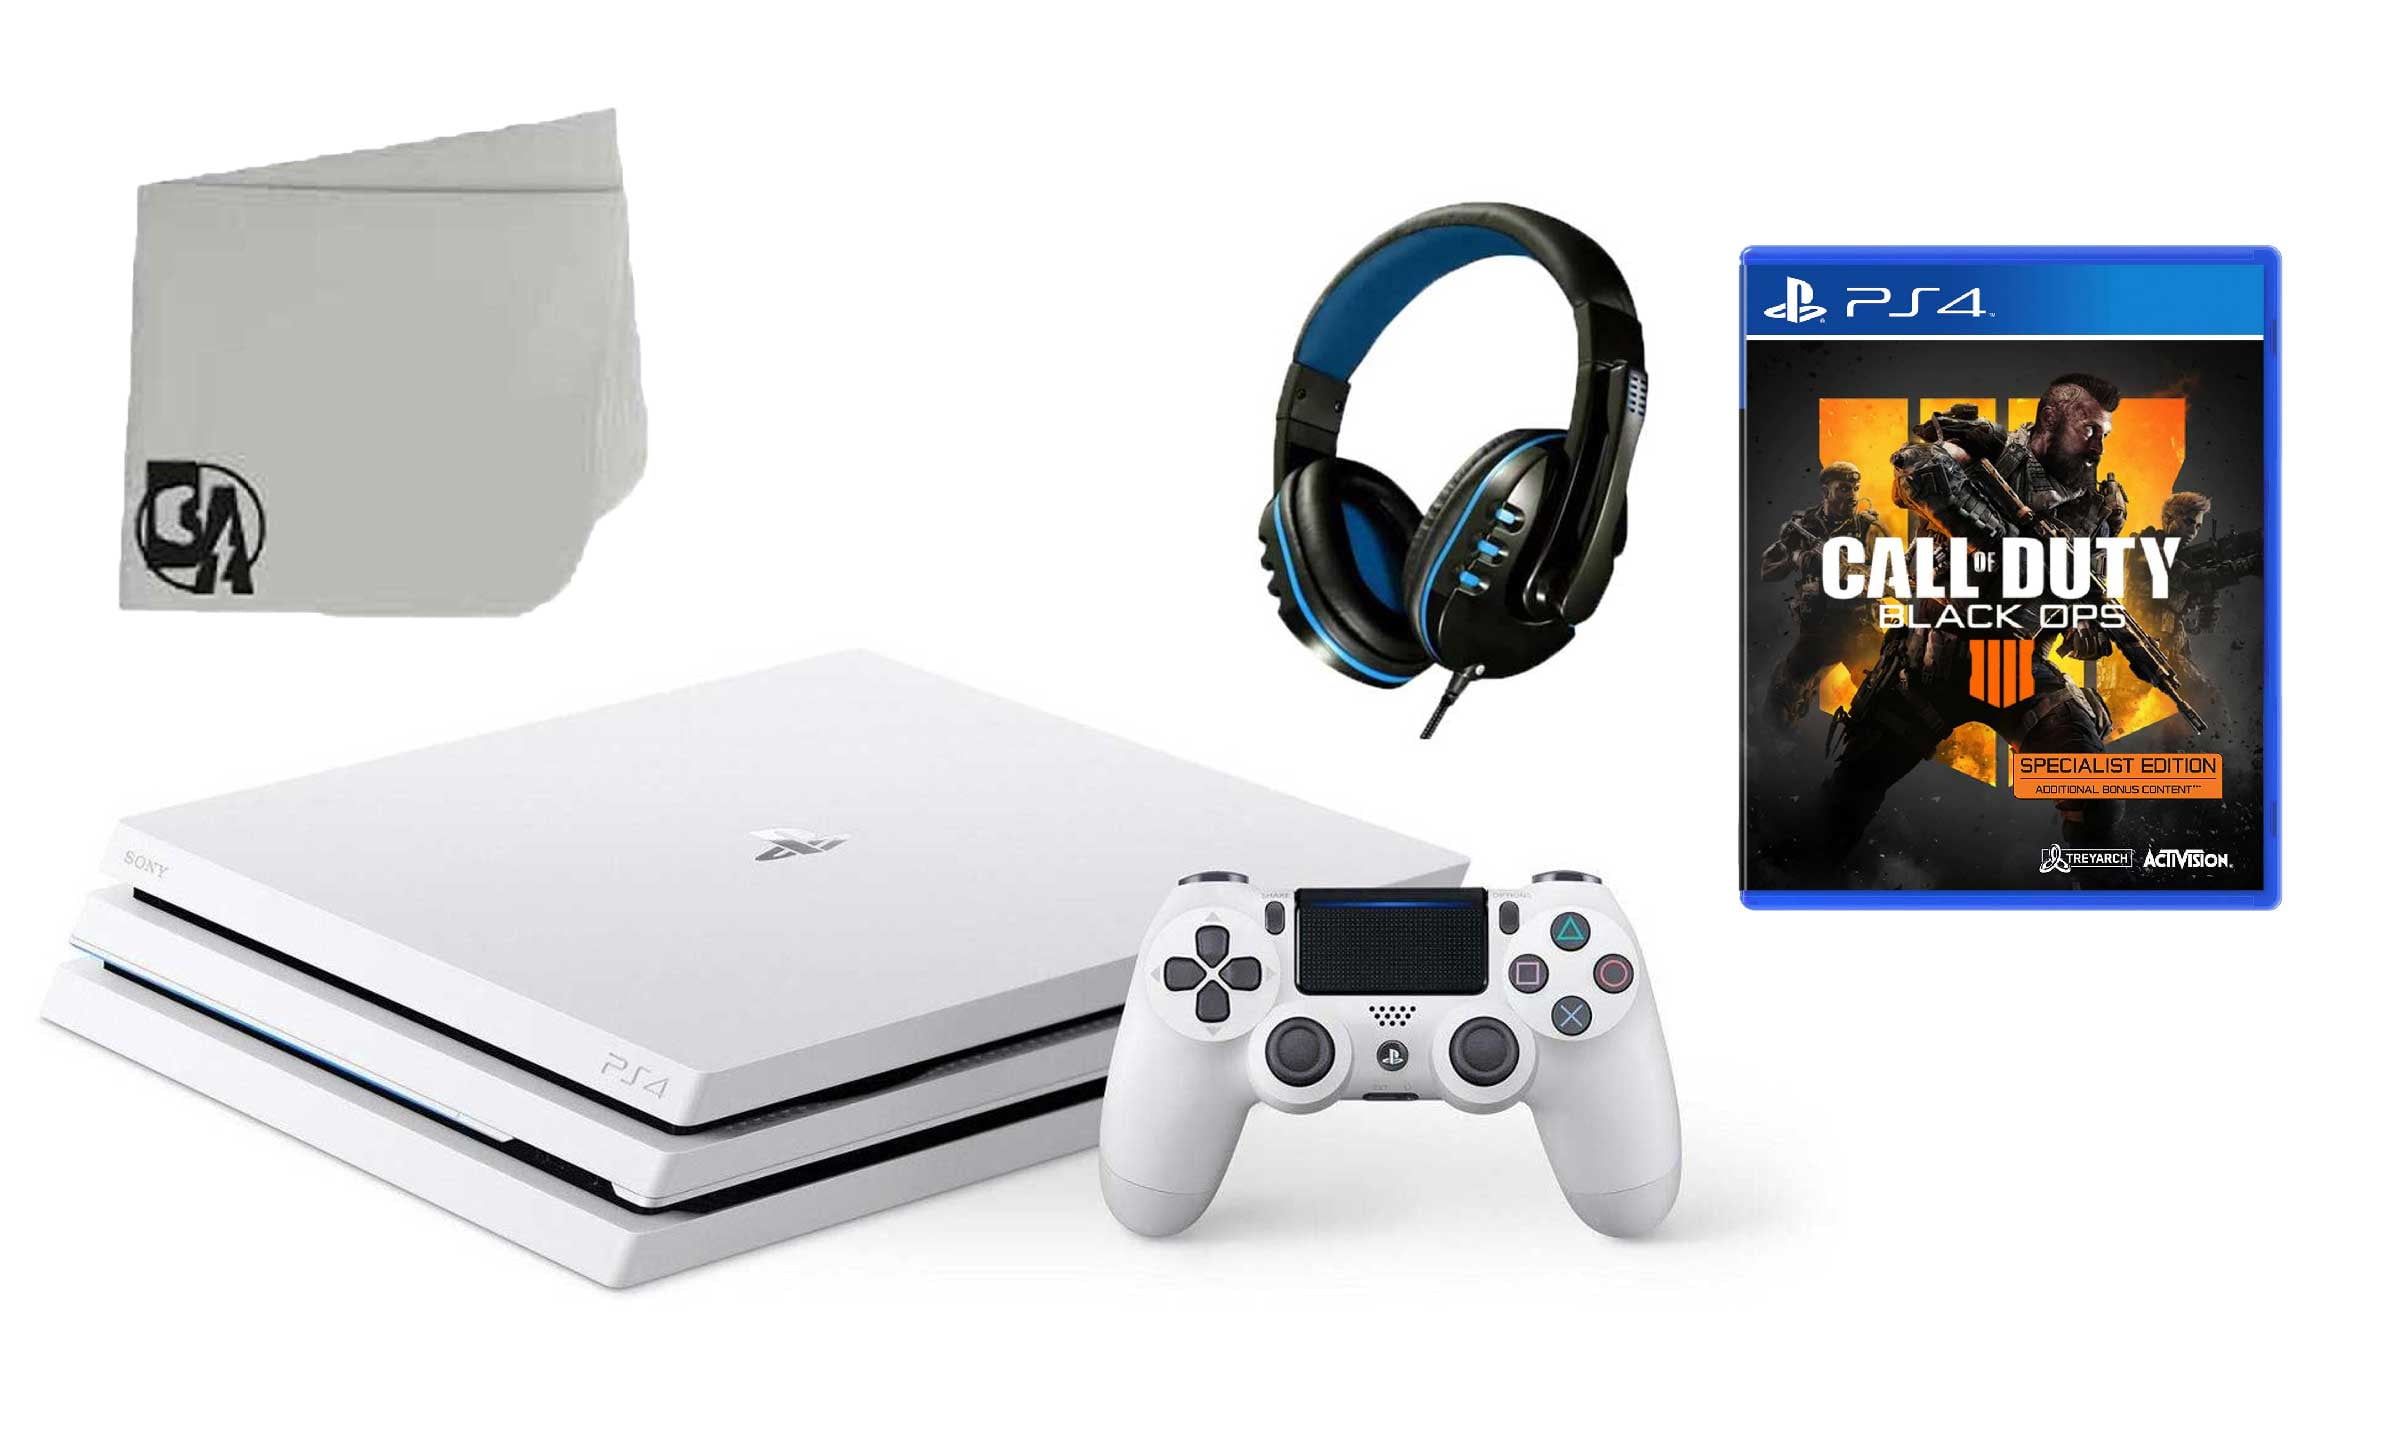 Sony PlayStation 4 Pro 1TB Red Dead Redemption 2 Console Bundle with H –  SuperE, LLC